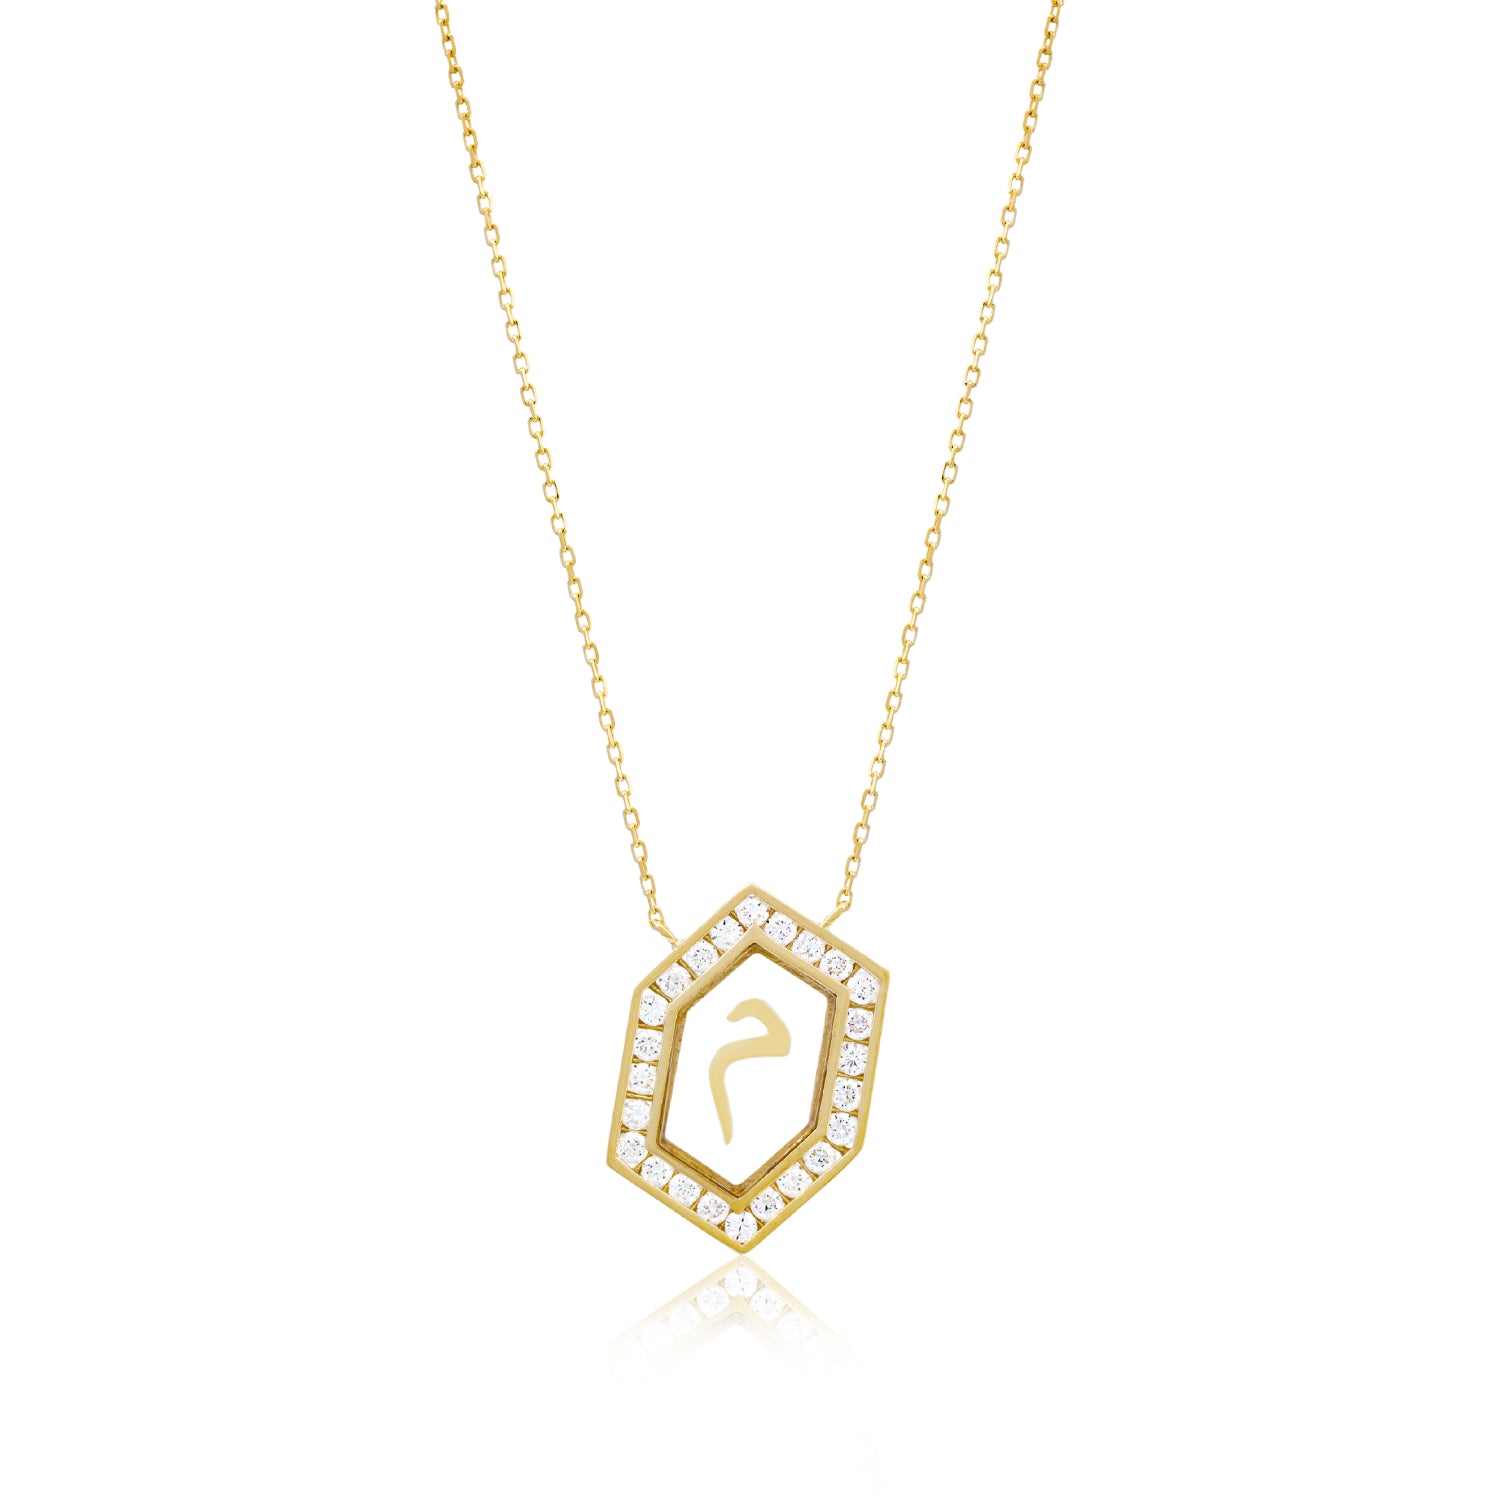 Qamoos 1.0 Letter م Diamond Necklace in Yellow Gold